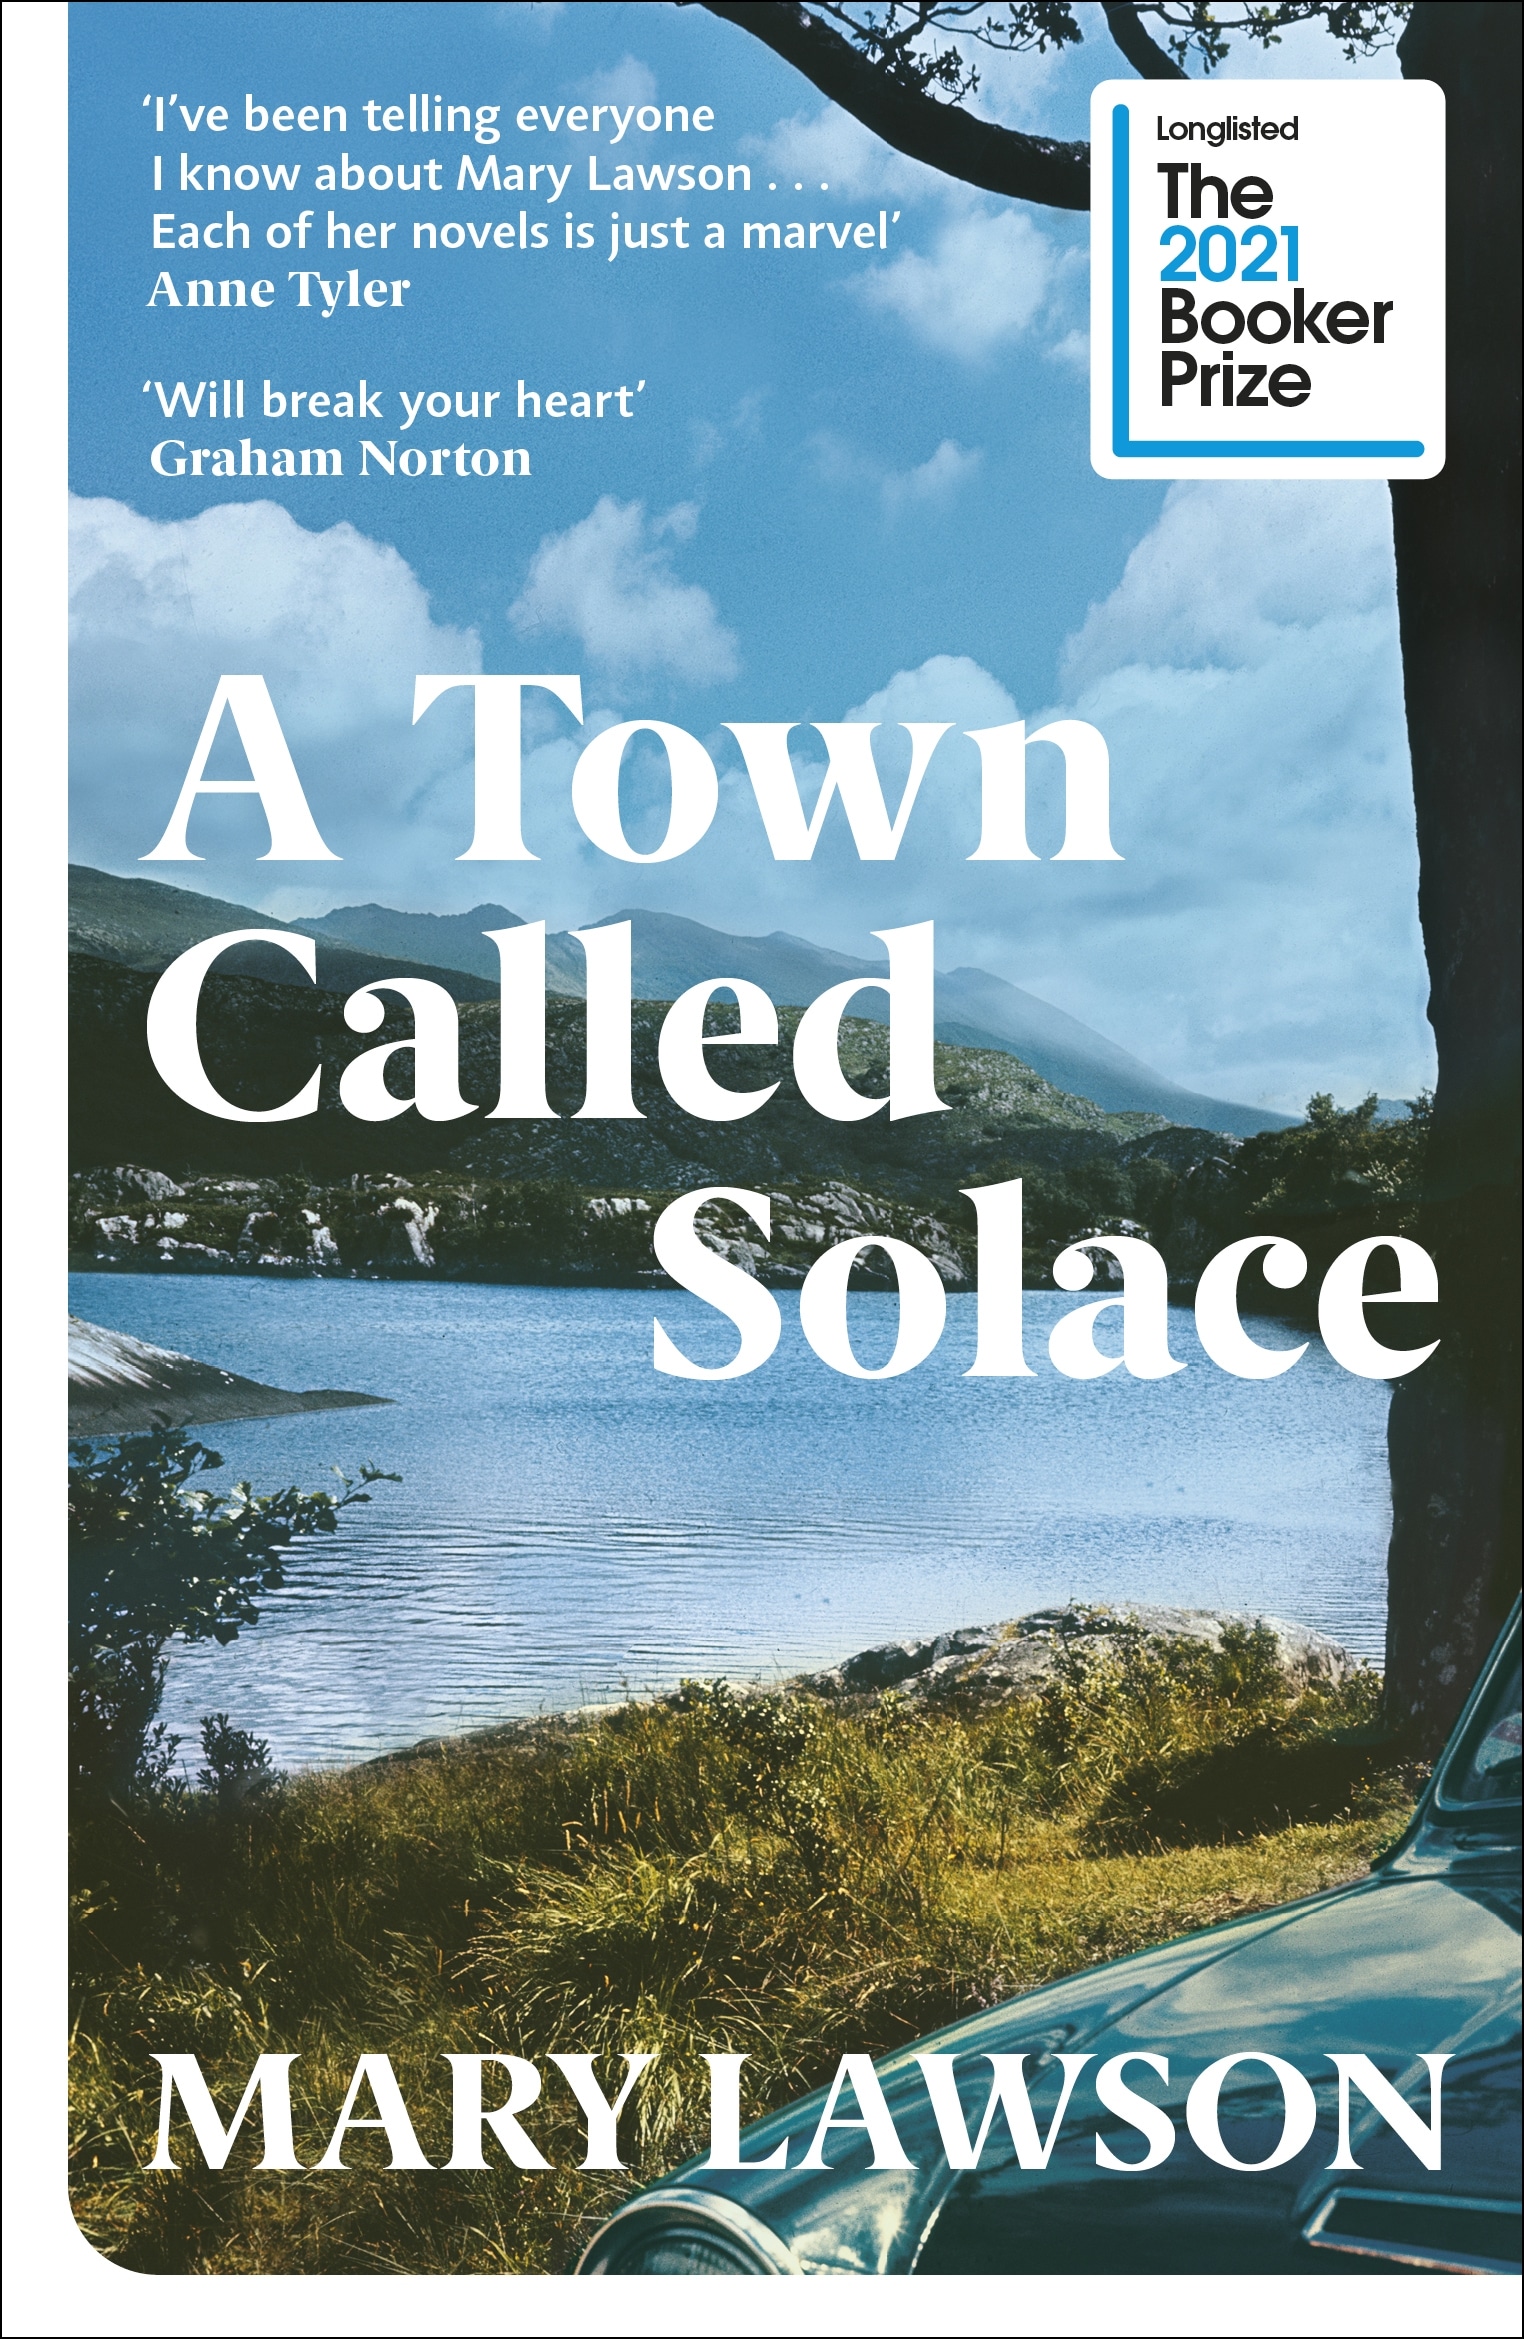 Book “A Town Called Solace” by Mary Lawson — March 17, 2022